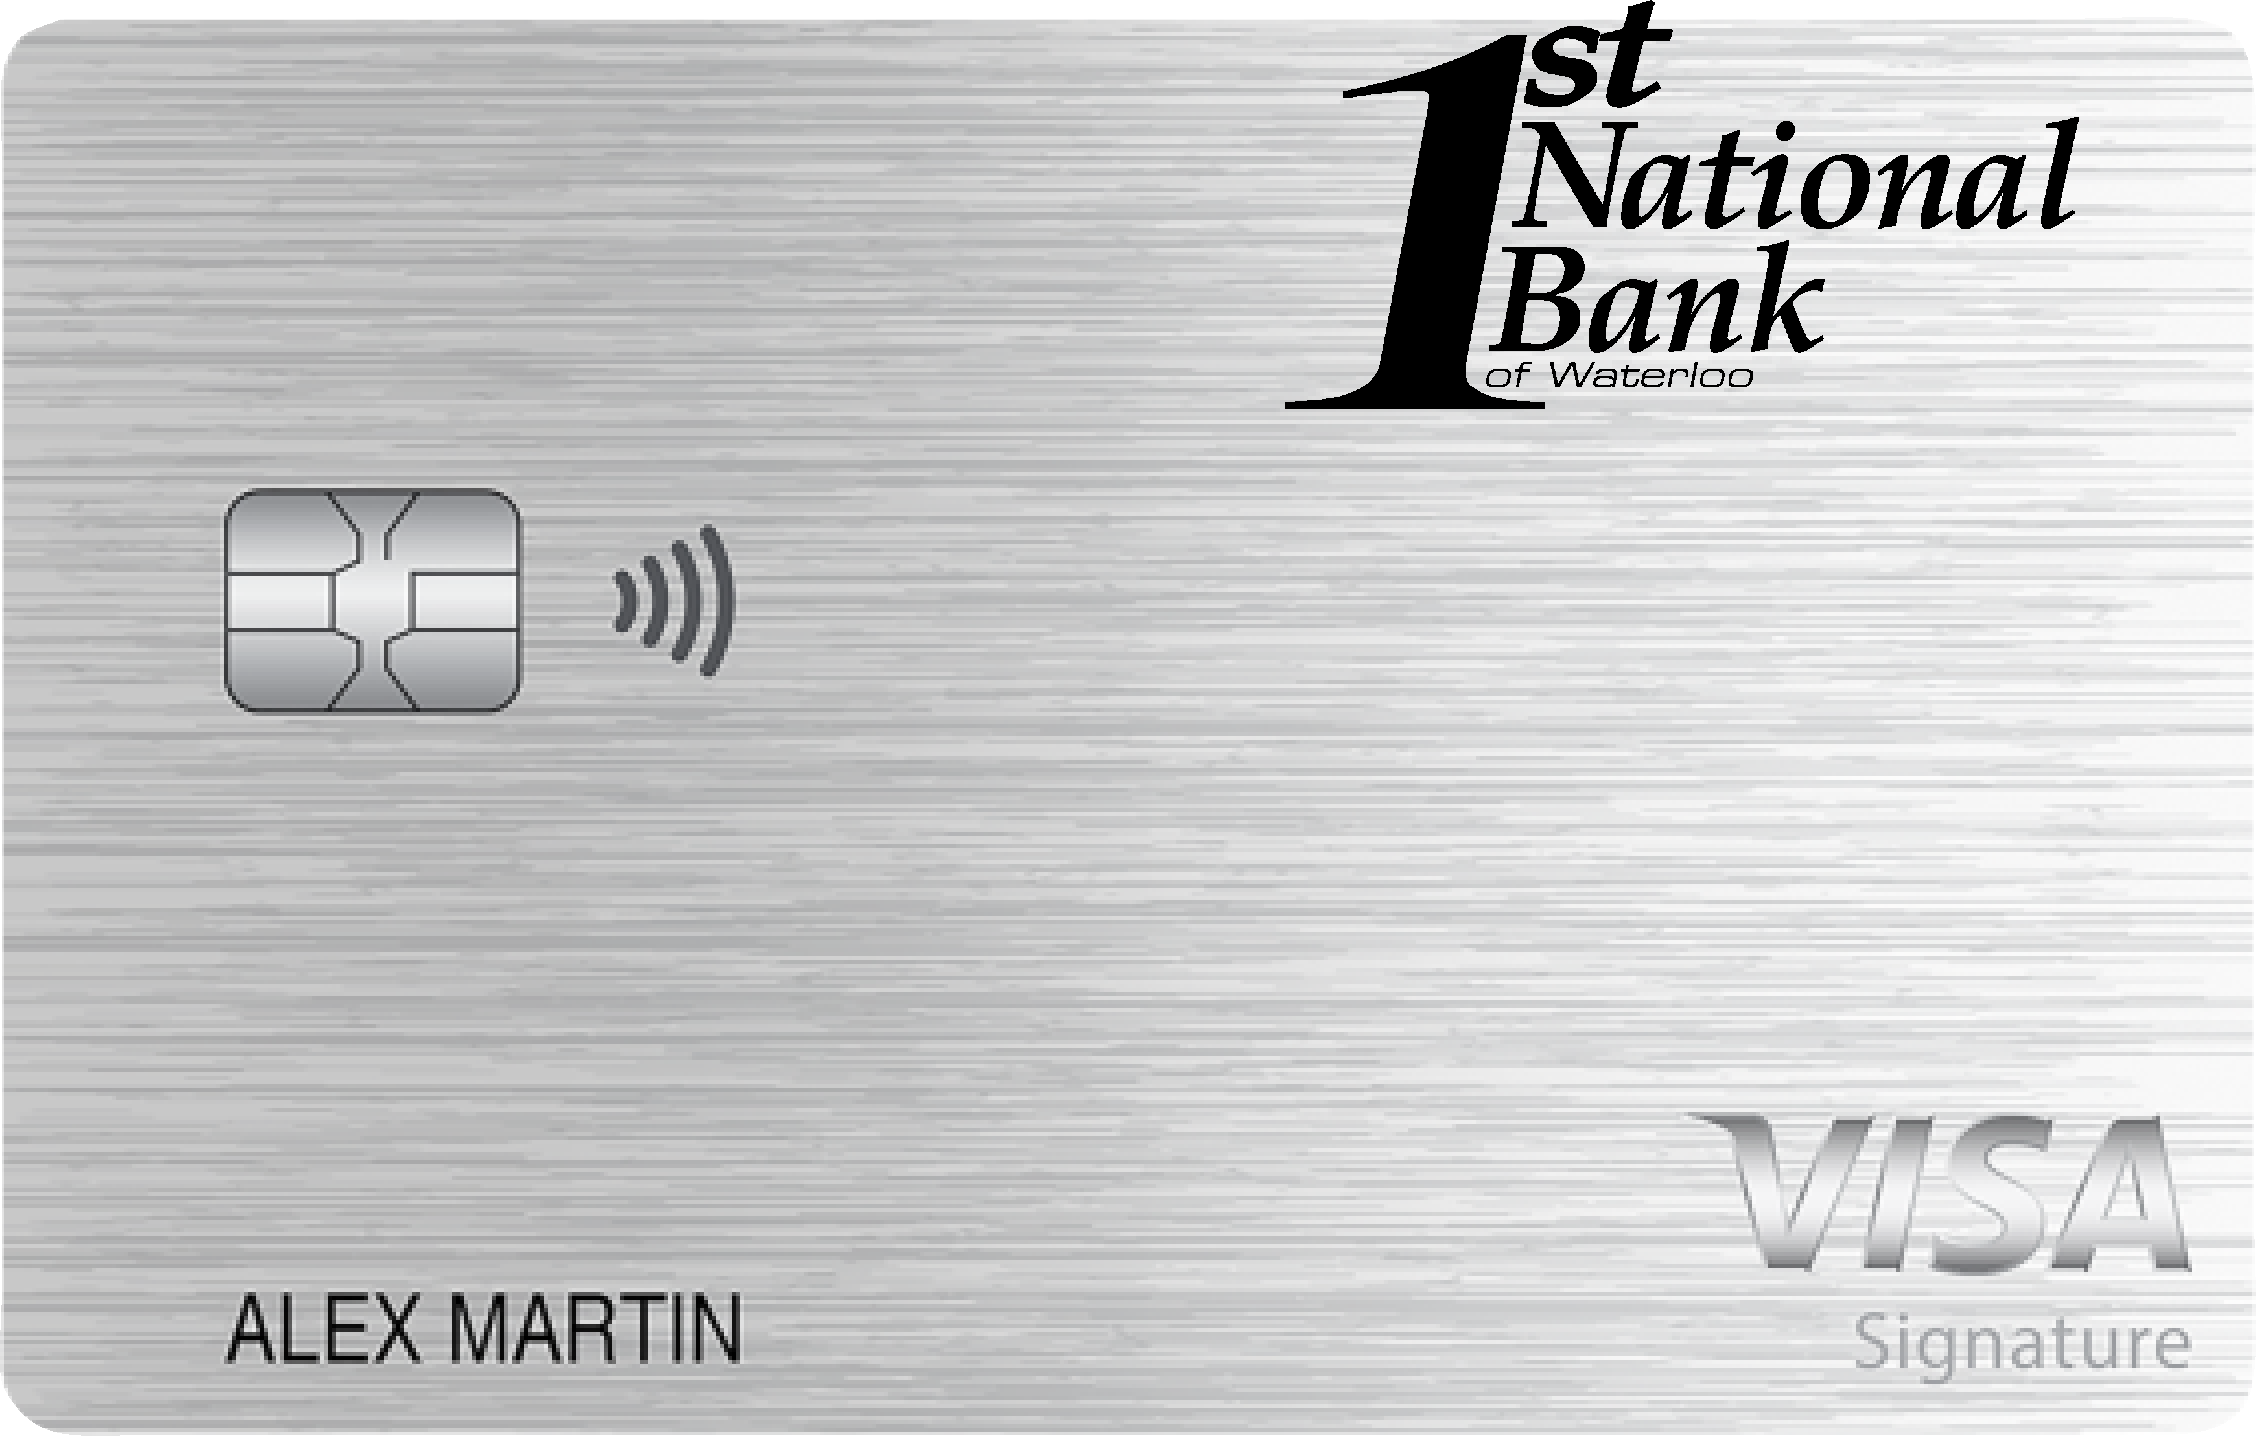 First National Bank of Waterloo Everyday Rewards+ Card